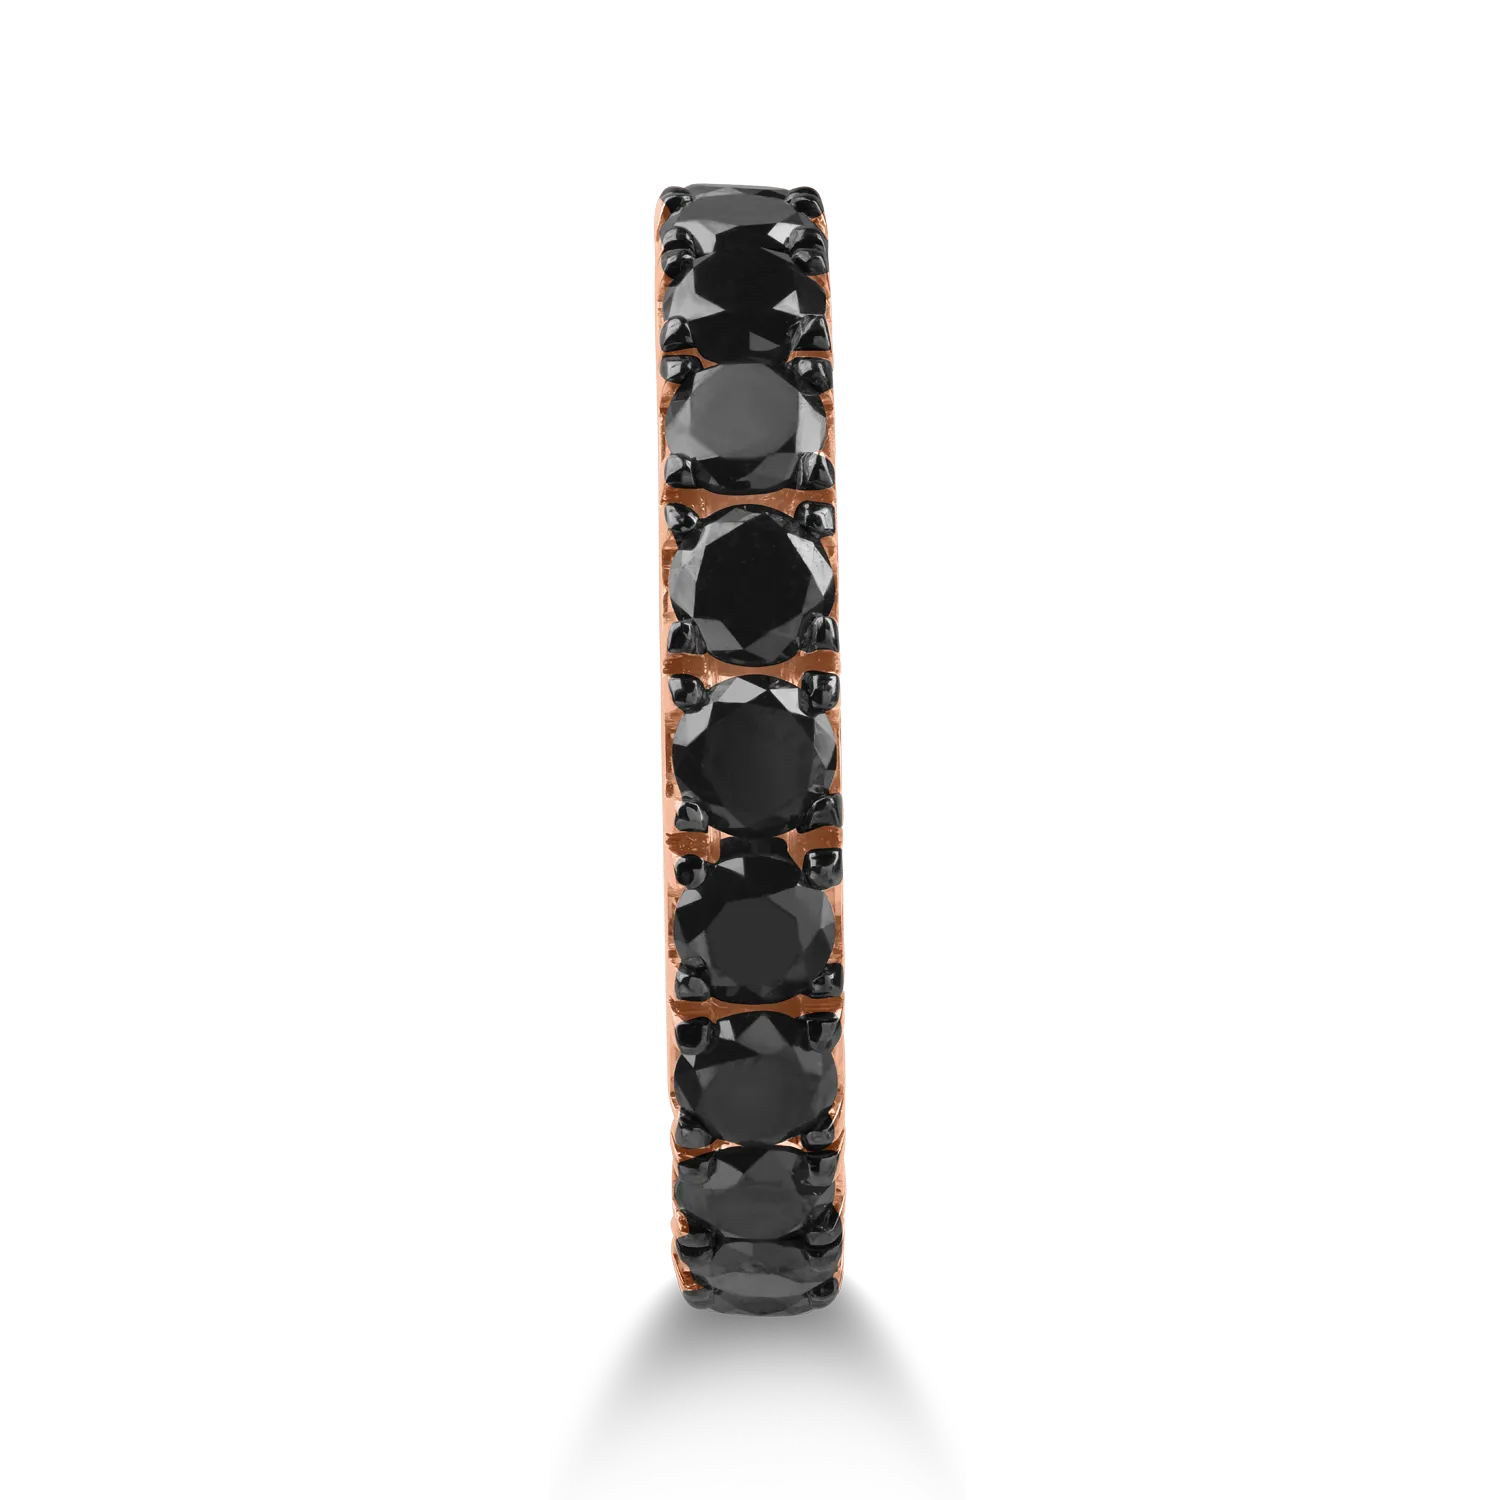 Eternity ring in rose gold with 2.39ct black diamonds